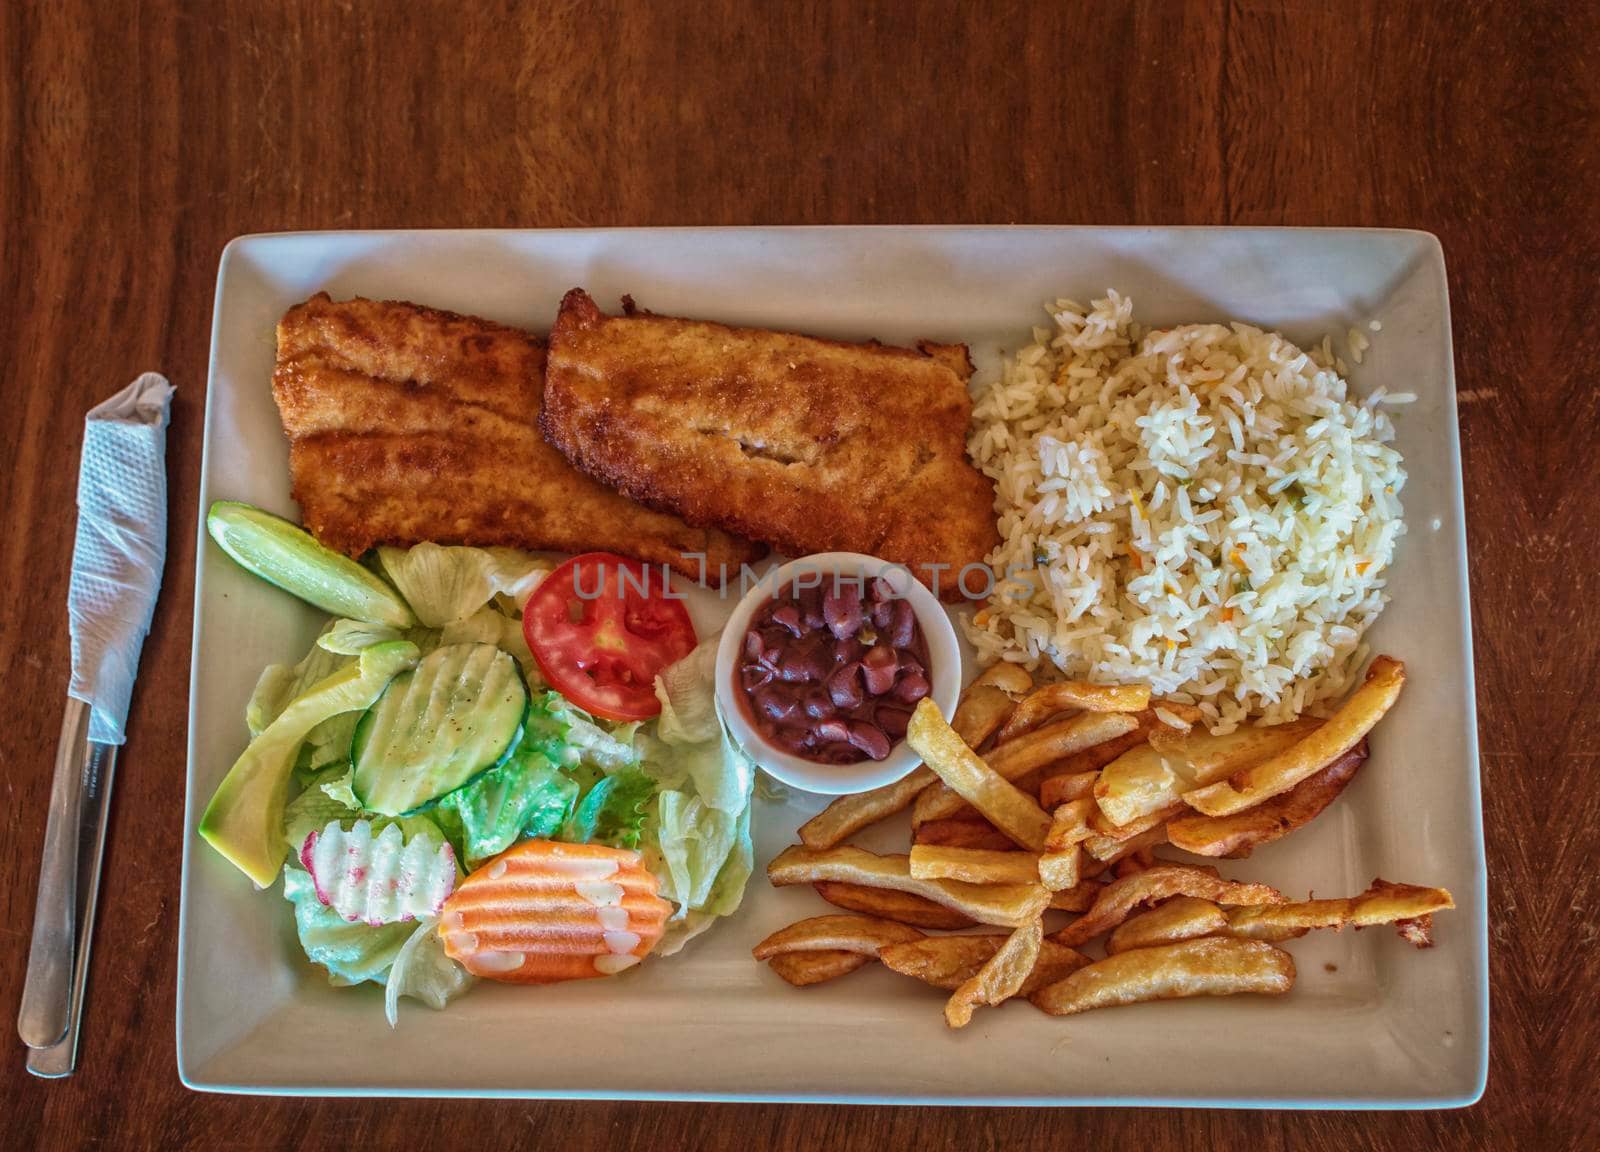 Plate of fried fish fillet with salad and french fries on wooden table, Top view of delicious fried fish fillet with french fries, rice and salad served on wooden table. Gourmet food plate